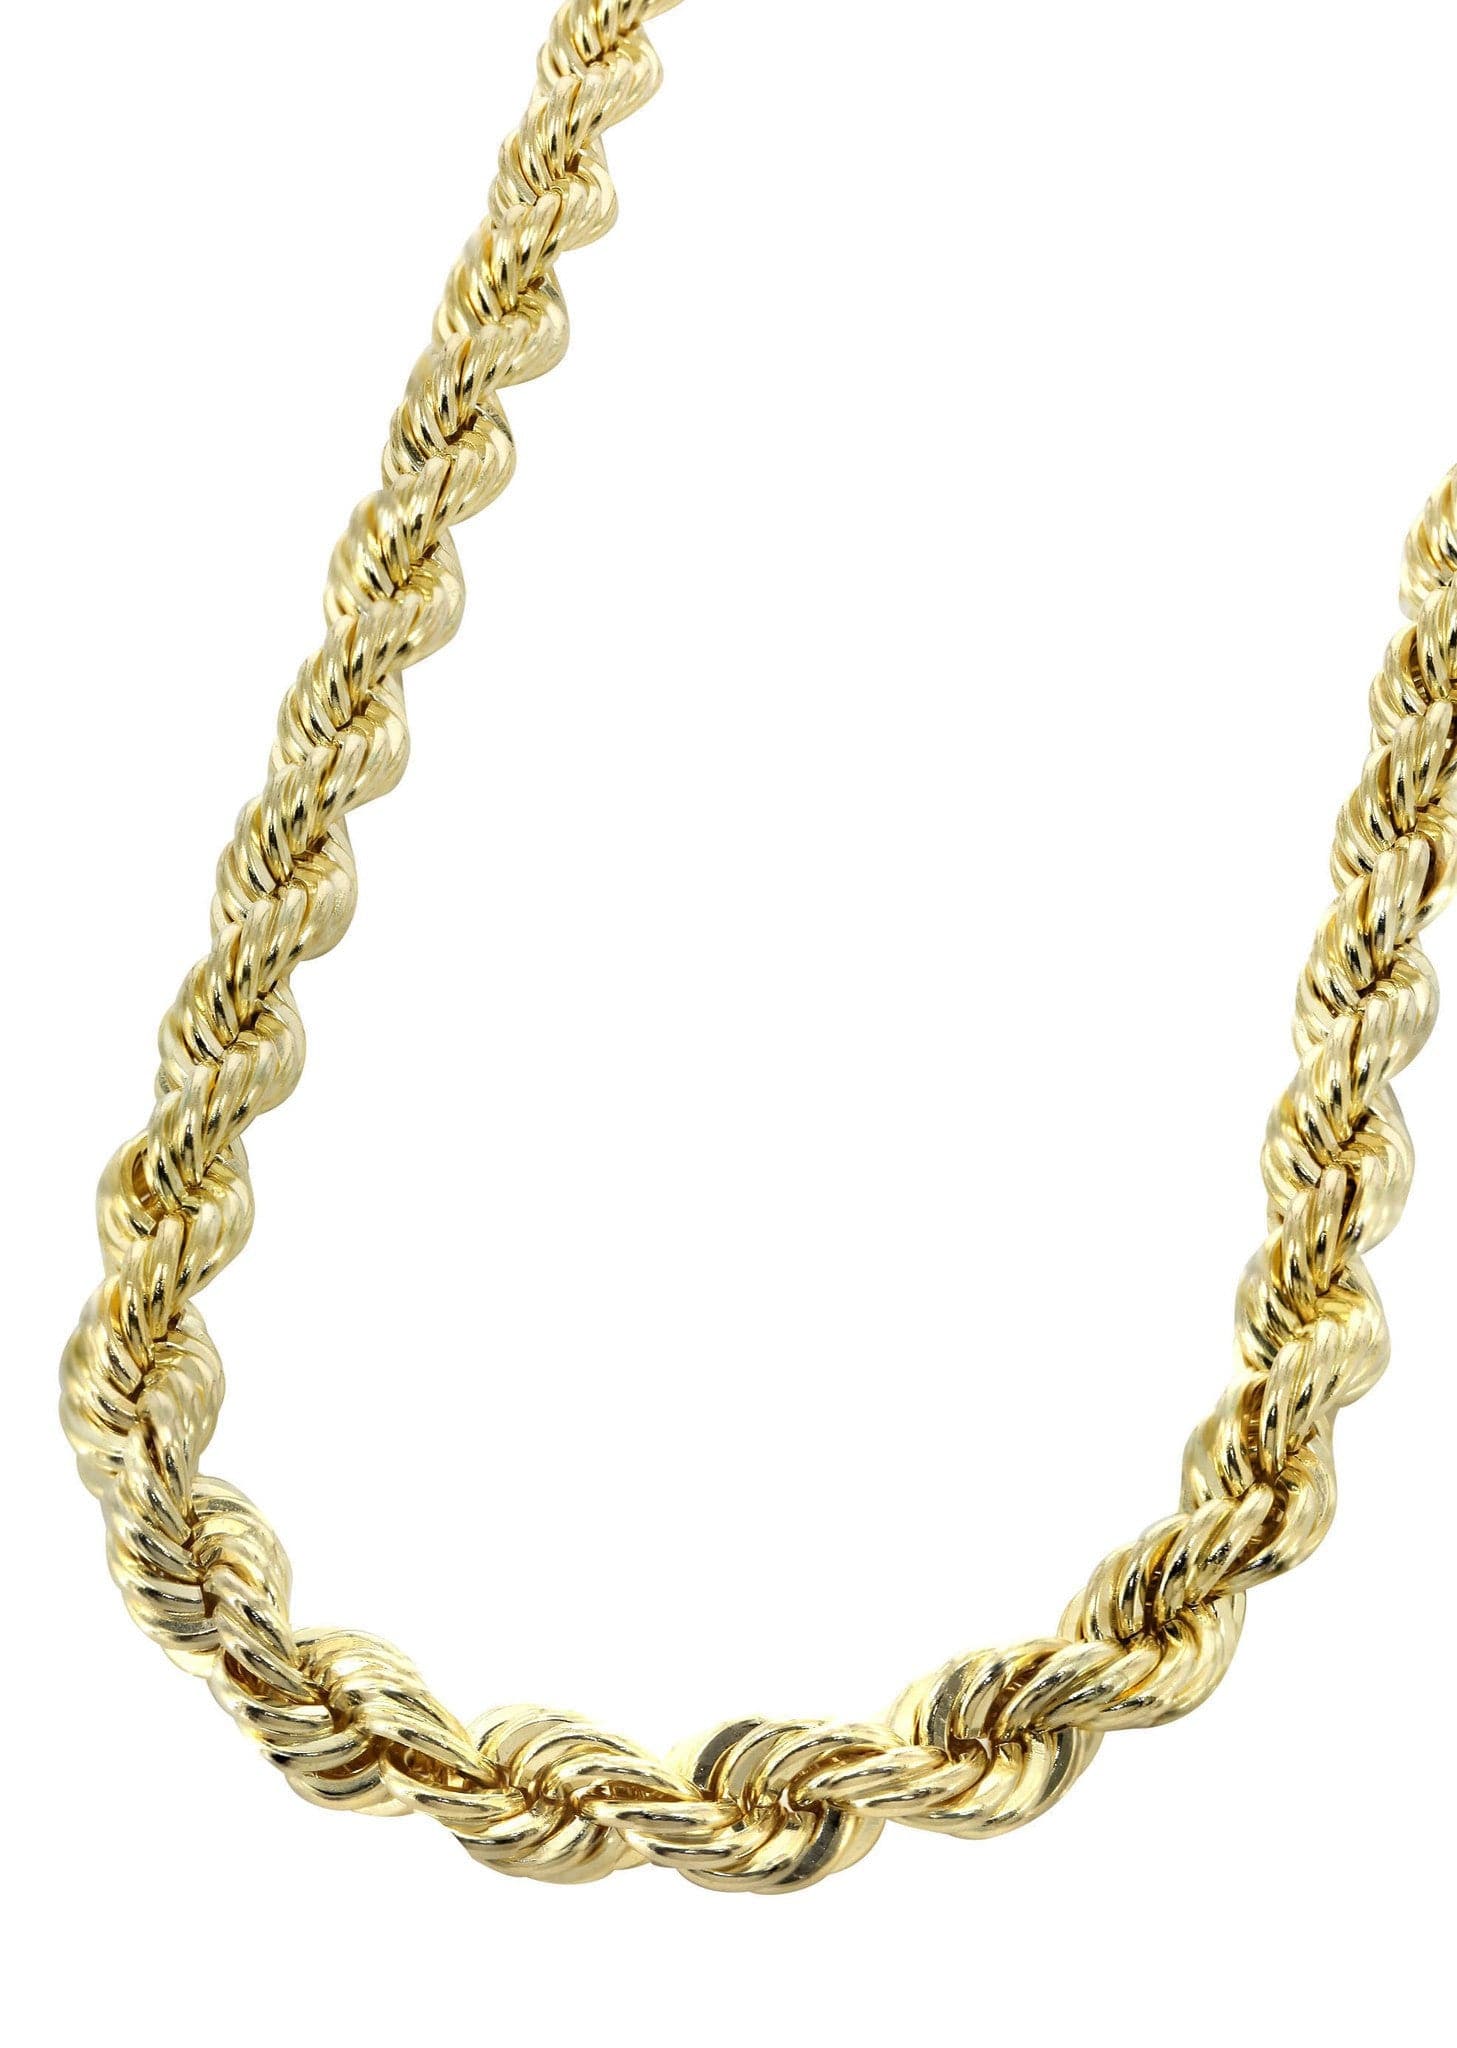 Gold Rope Chain 2mm - Gold Presidents